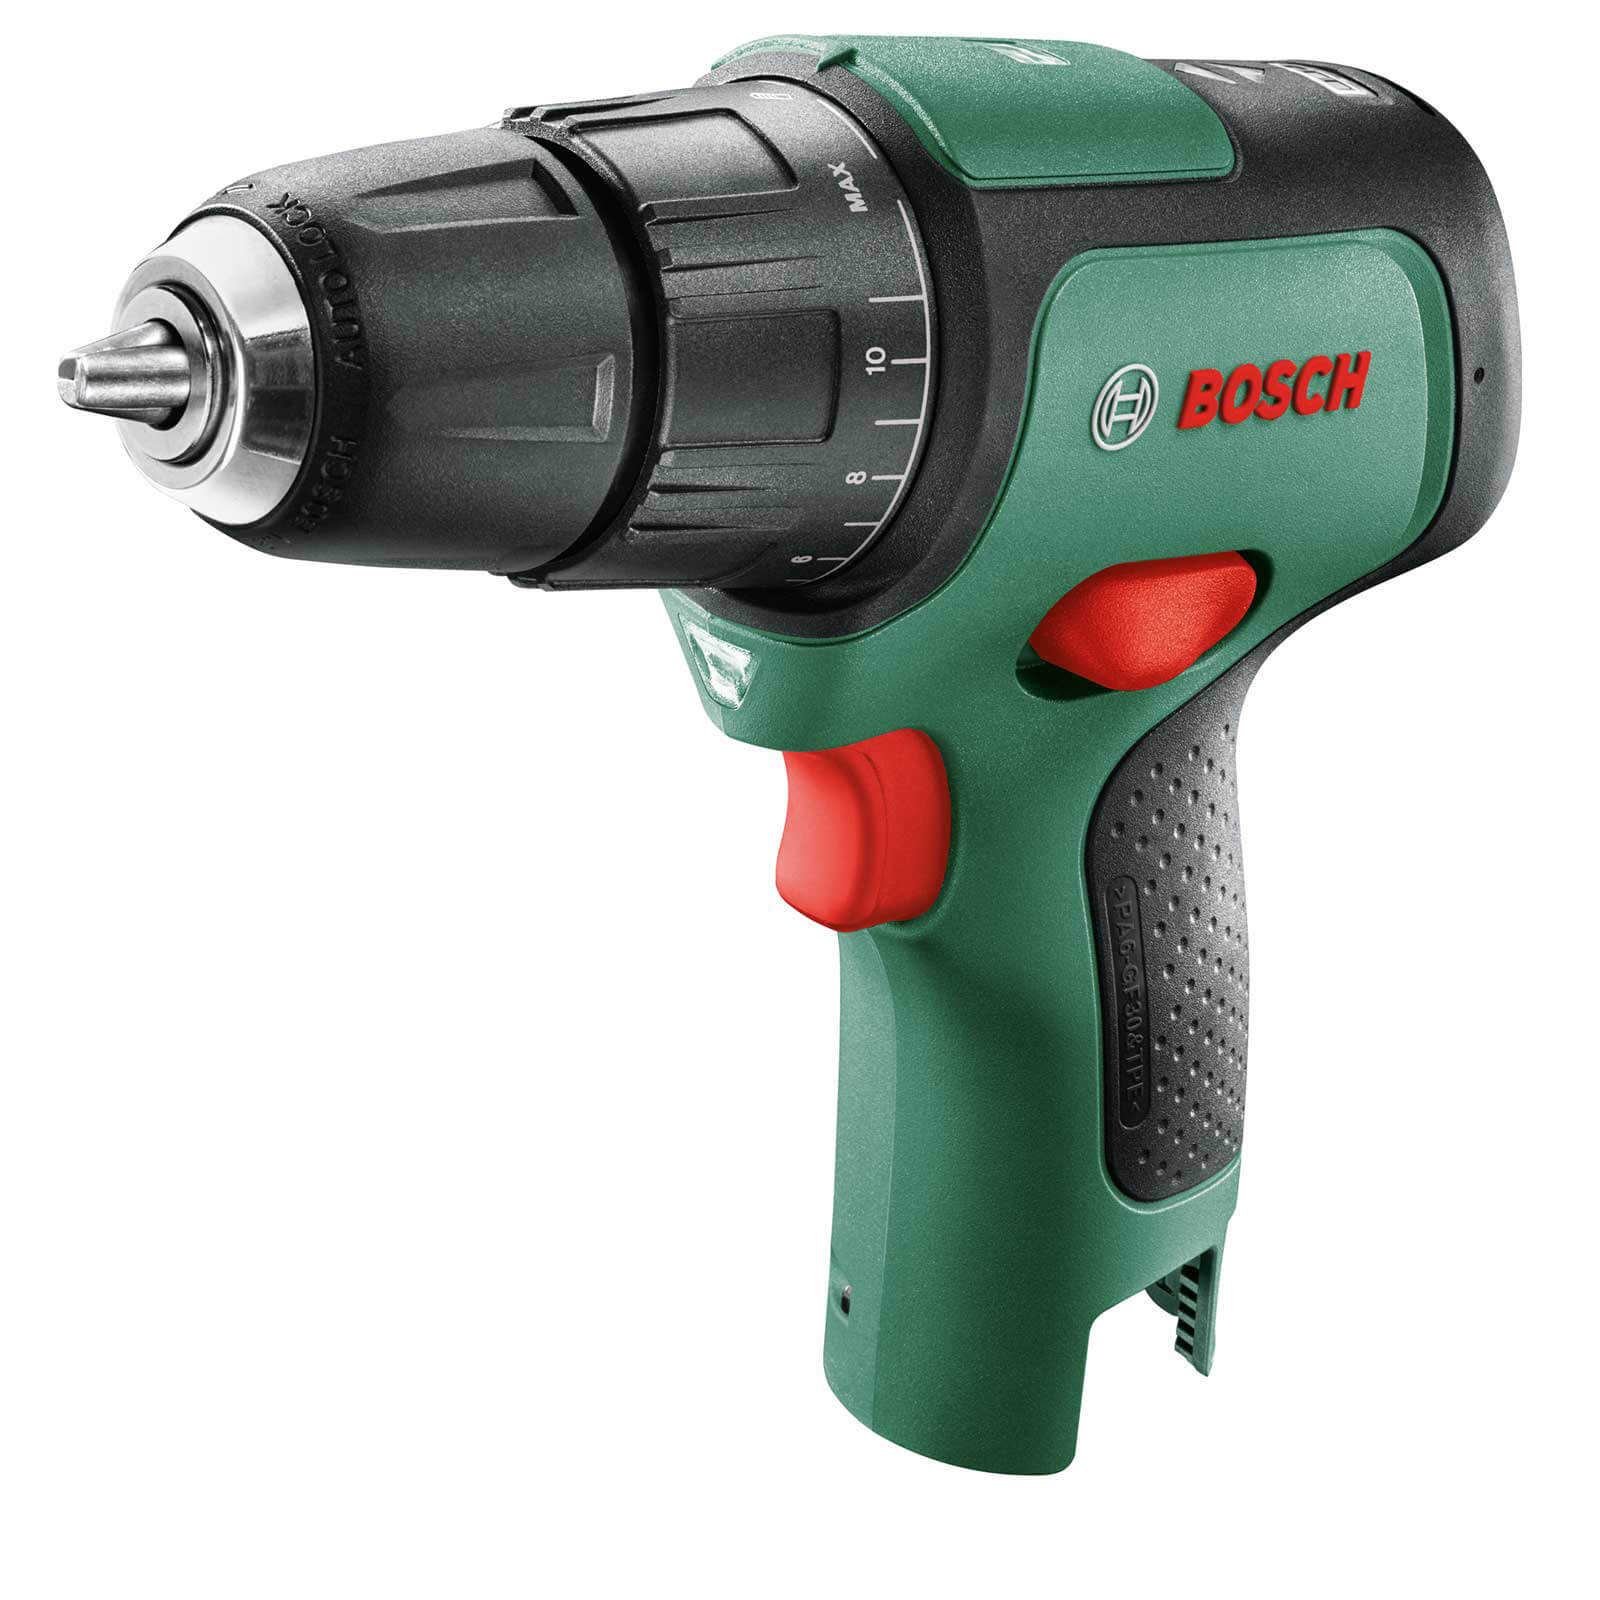 Bosch EASYIMPACT 12v Cordless Brushless Combi Drill No Batteries Charger No Case